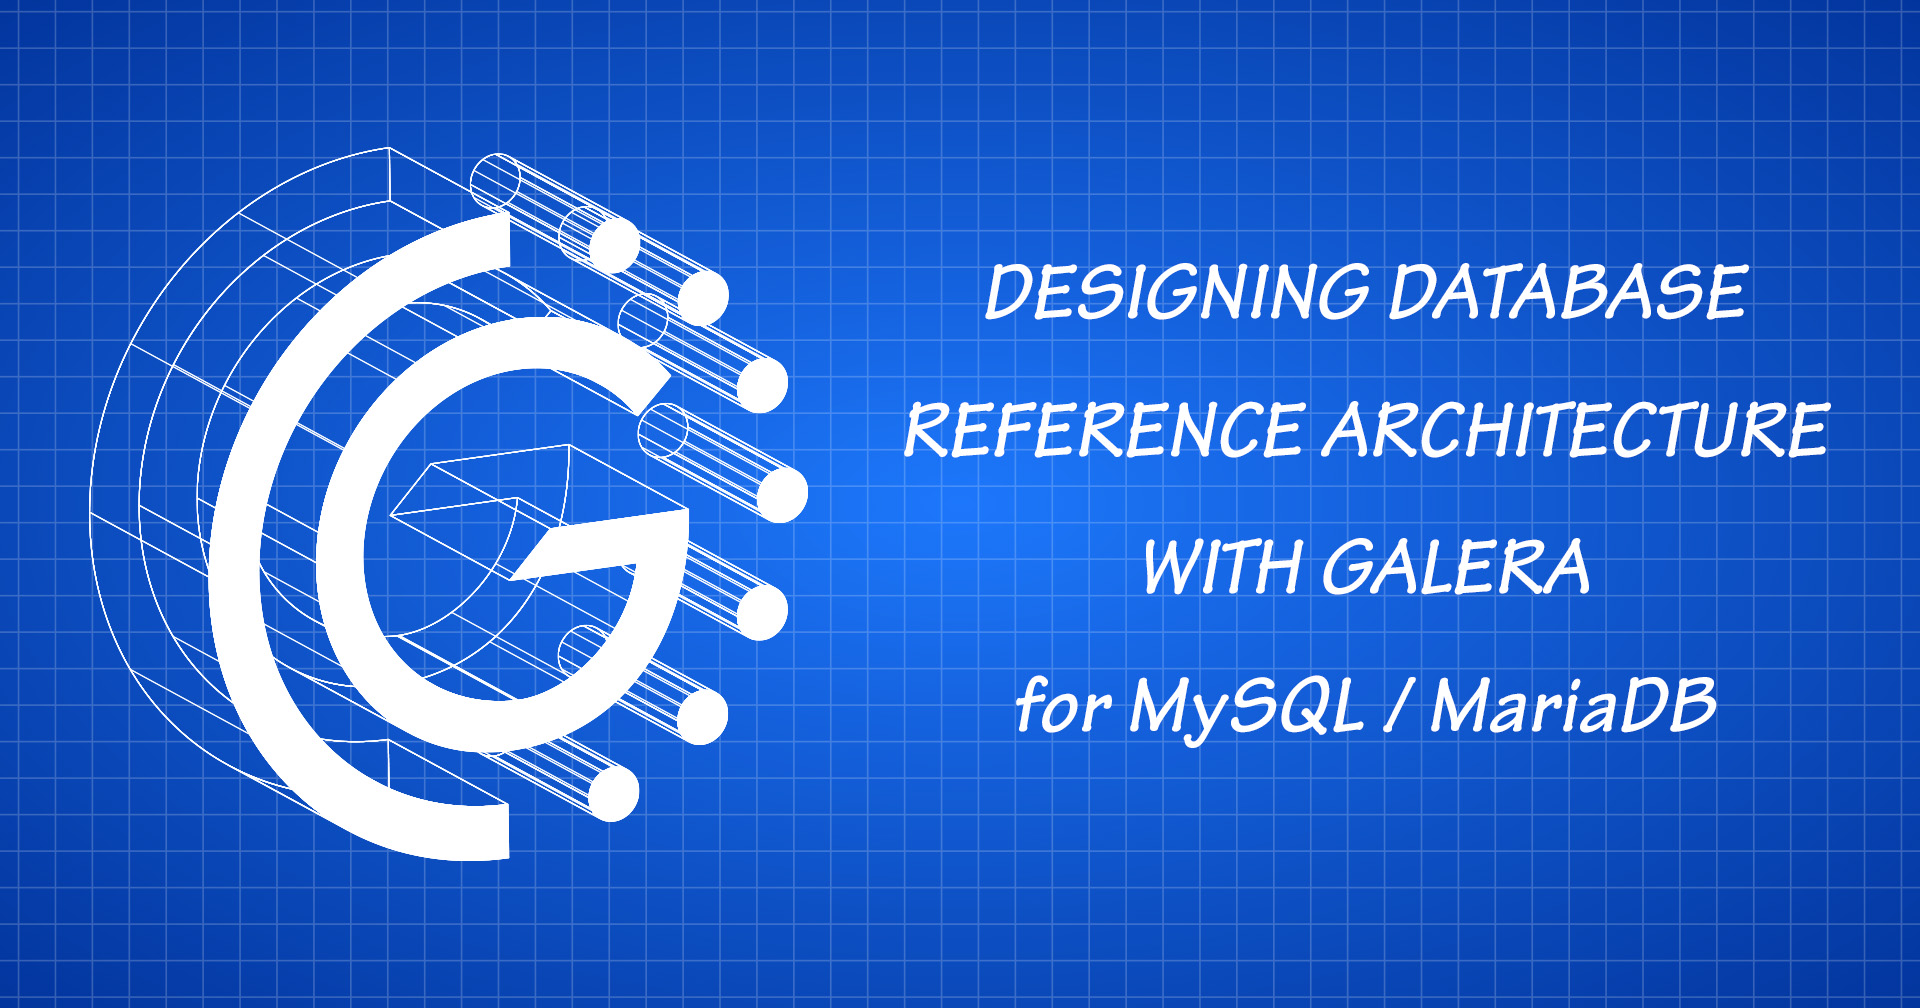 Designing-Database-Reference-Architecture-with-Galera-for-MySQL-MariaDB